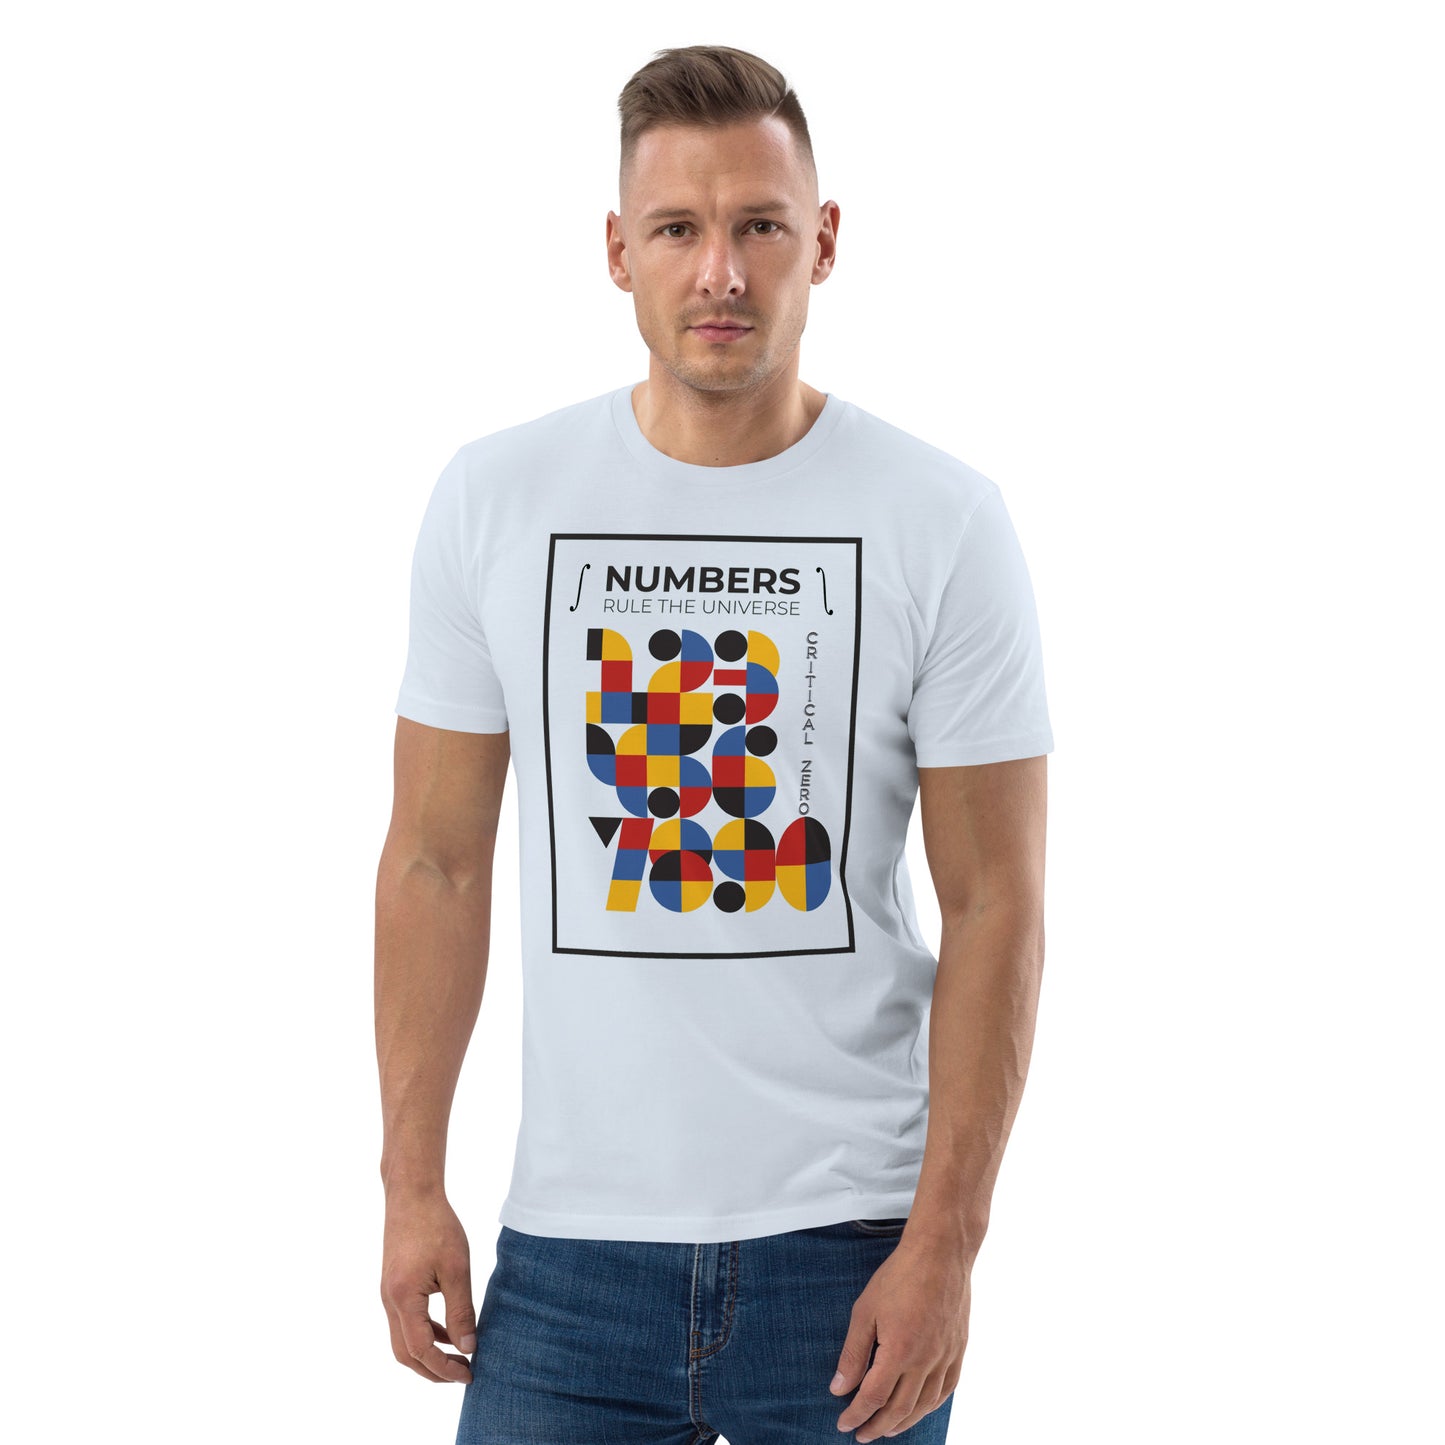 Unisex organic cotton t-shirt - Numbers Rule The Universe